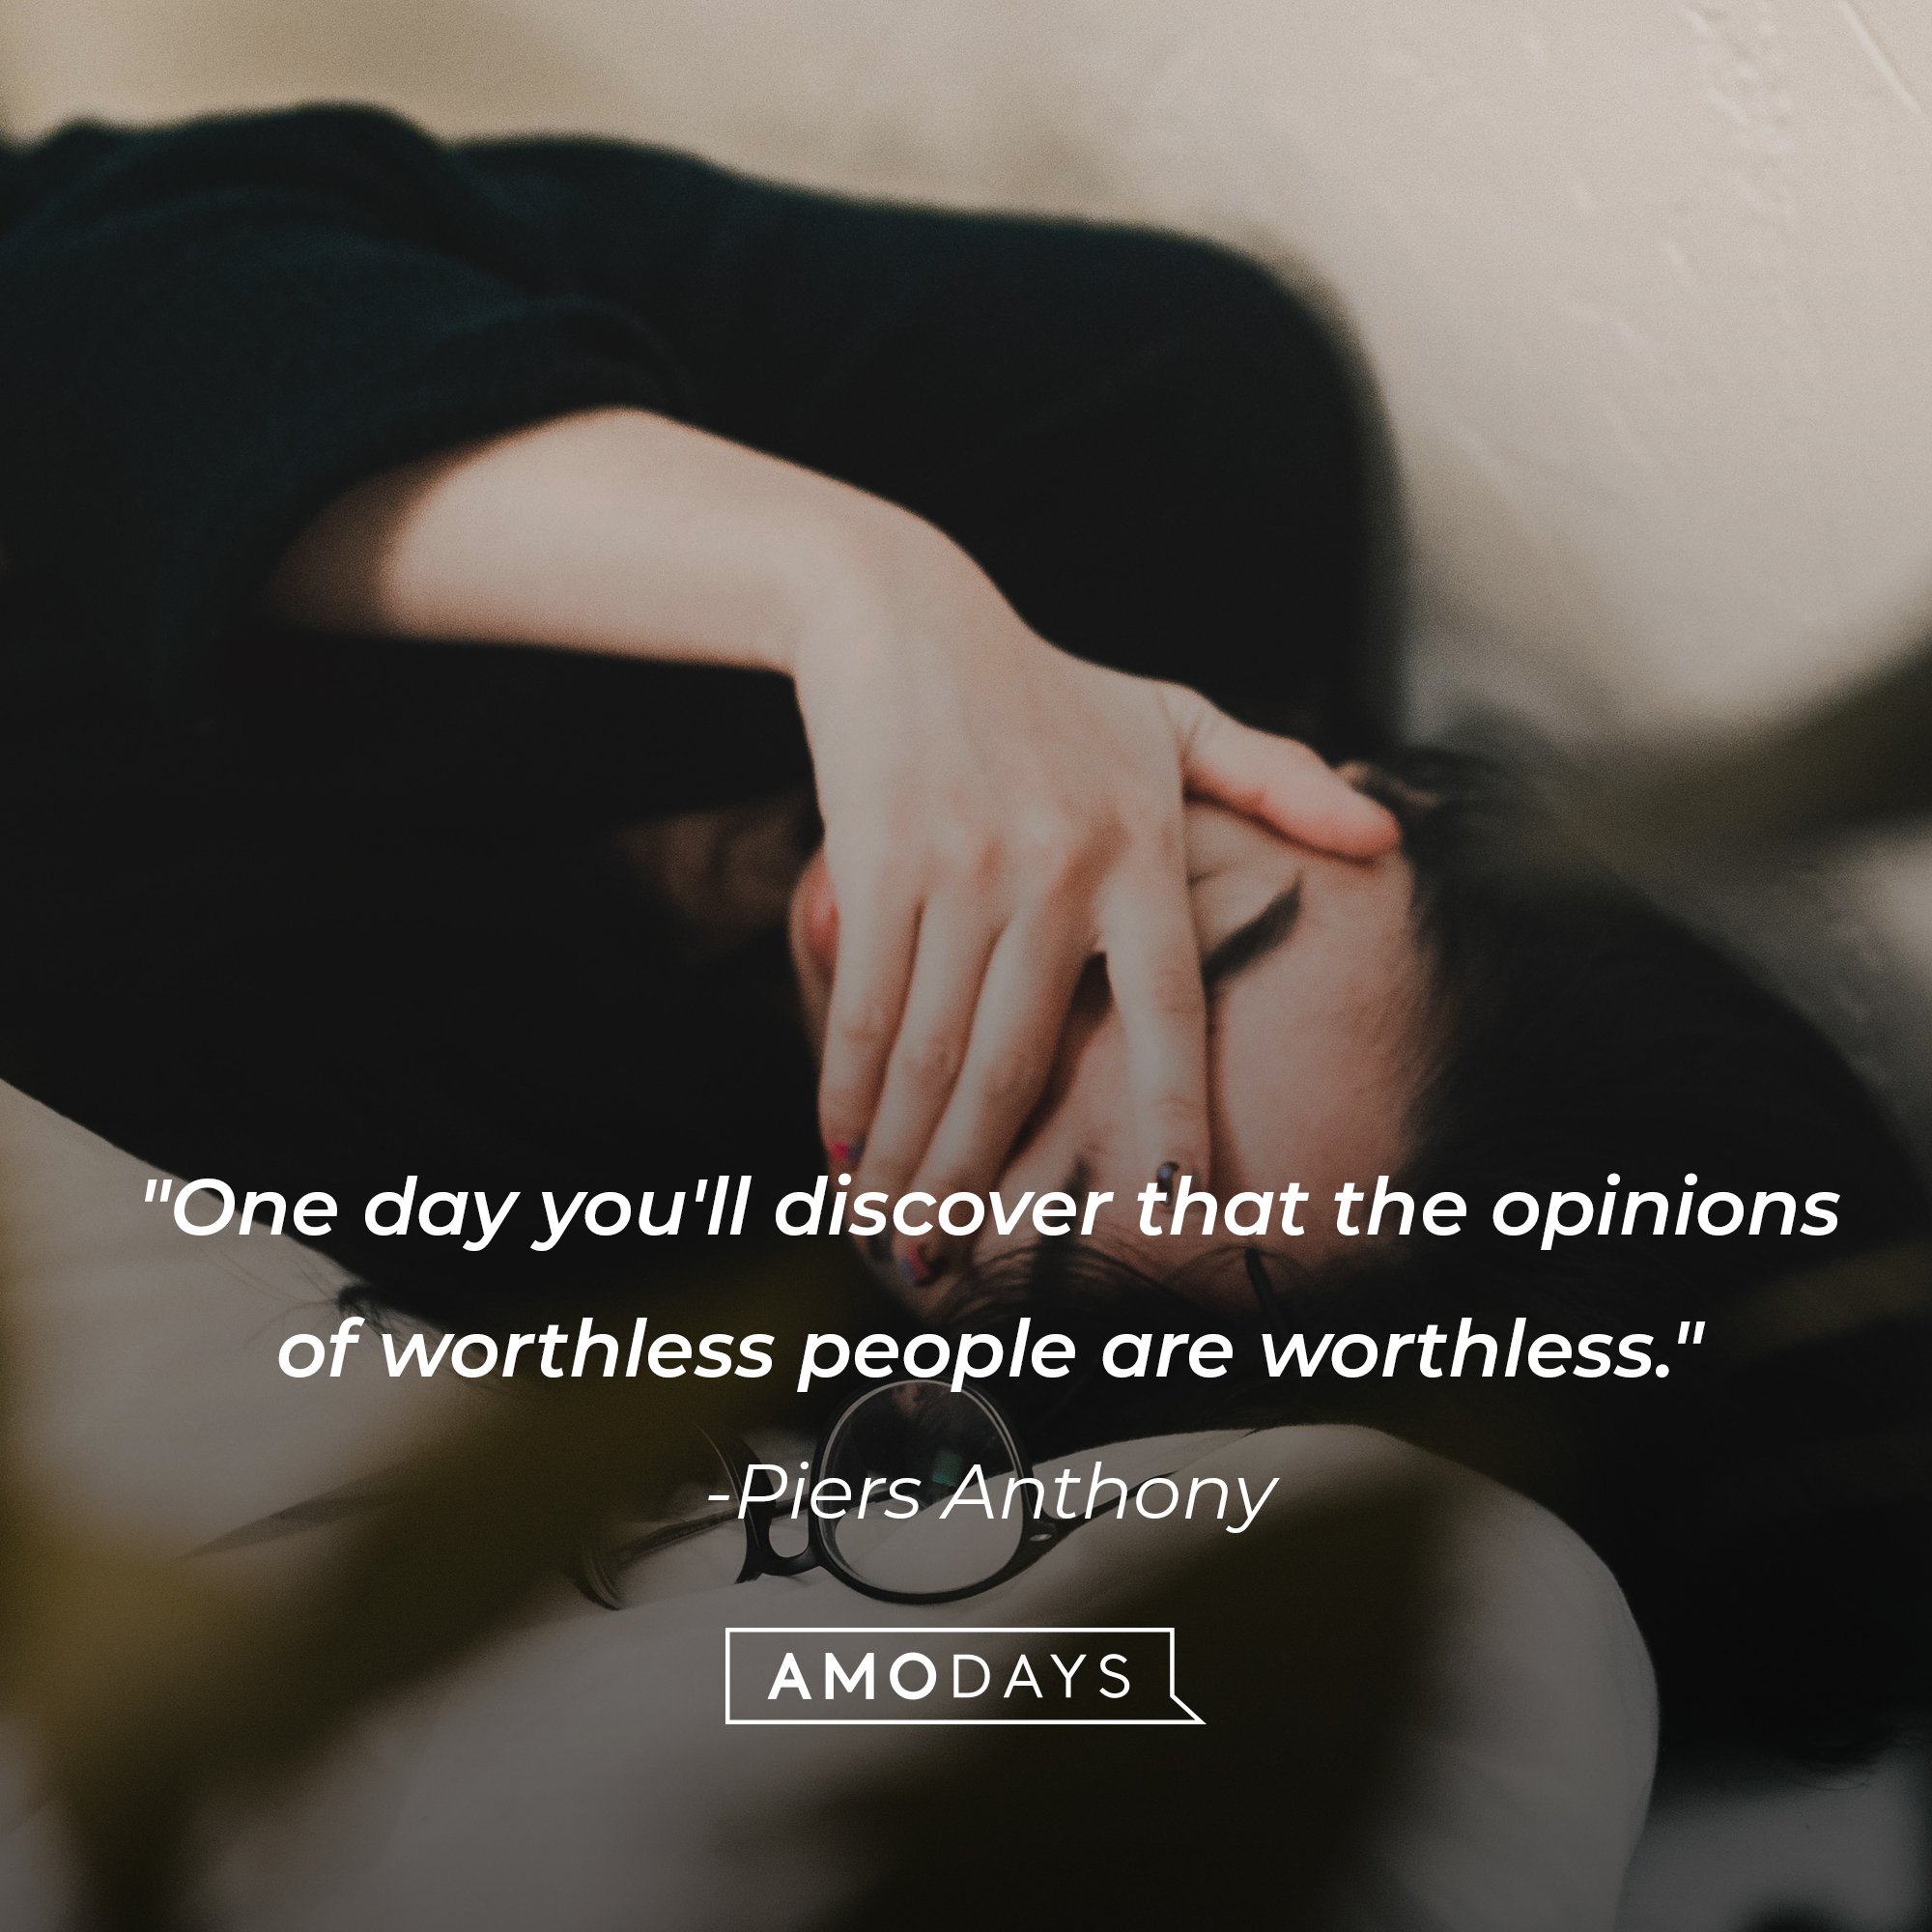 Piers Anthony's quote: "One day you'll discover that the opinions of worthless people are worthless." | Image: AmoDays